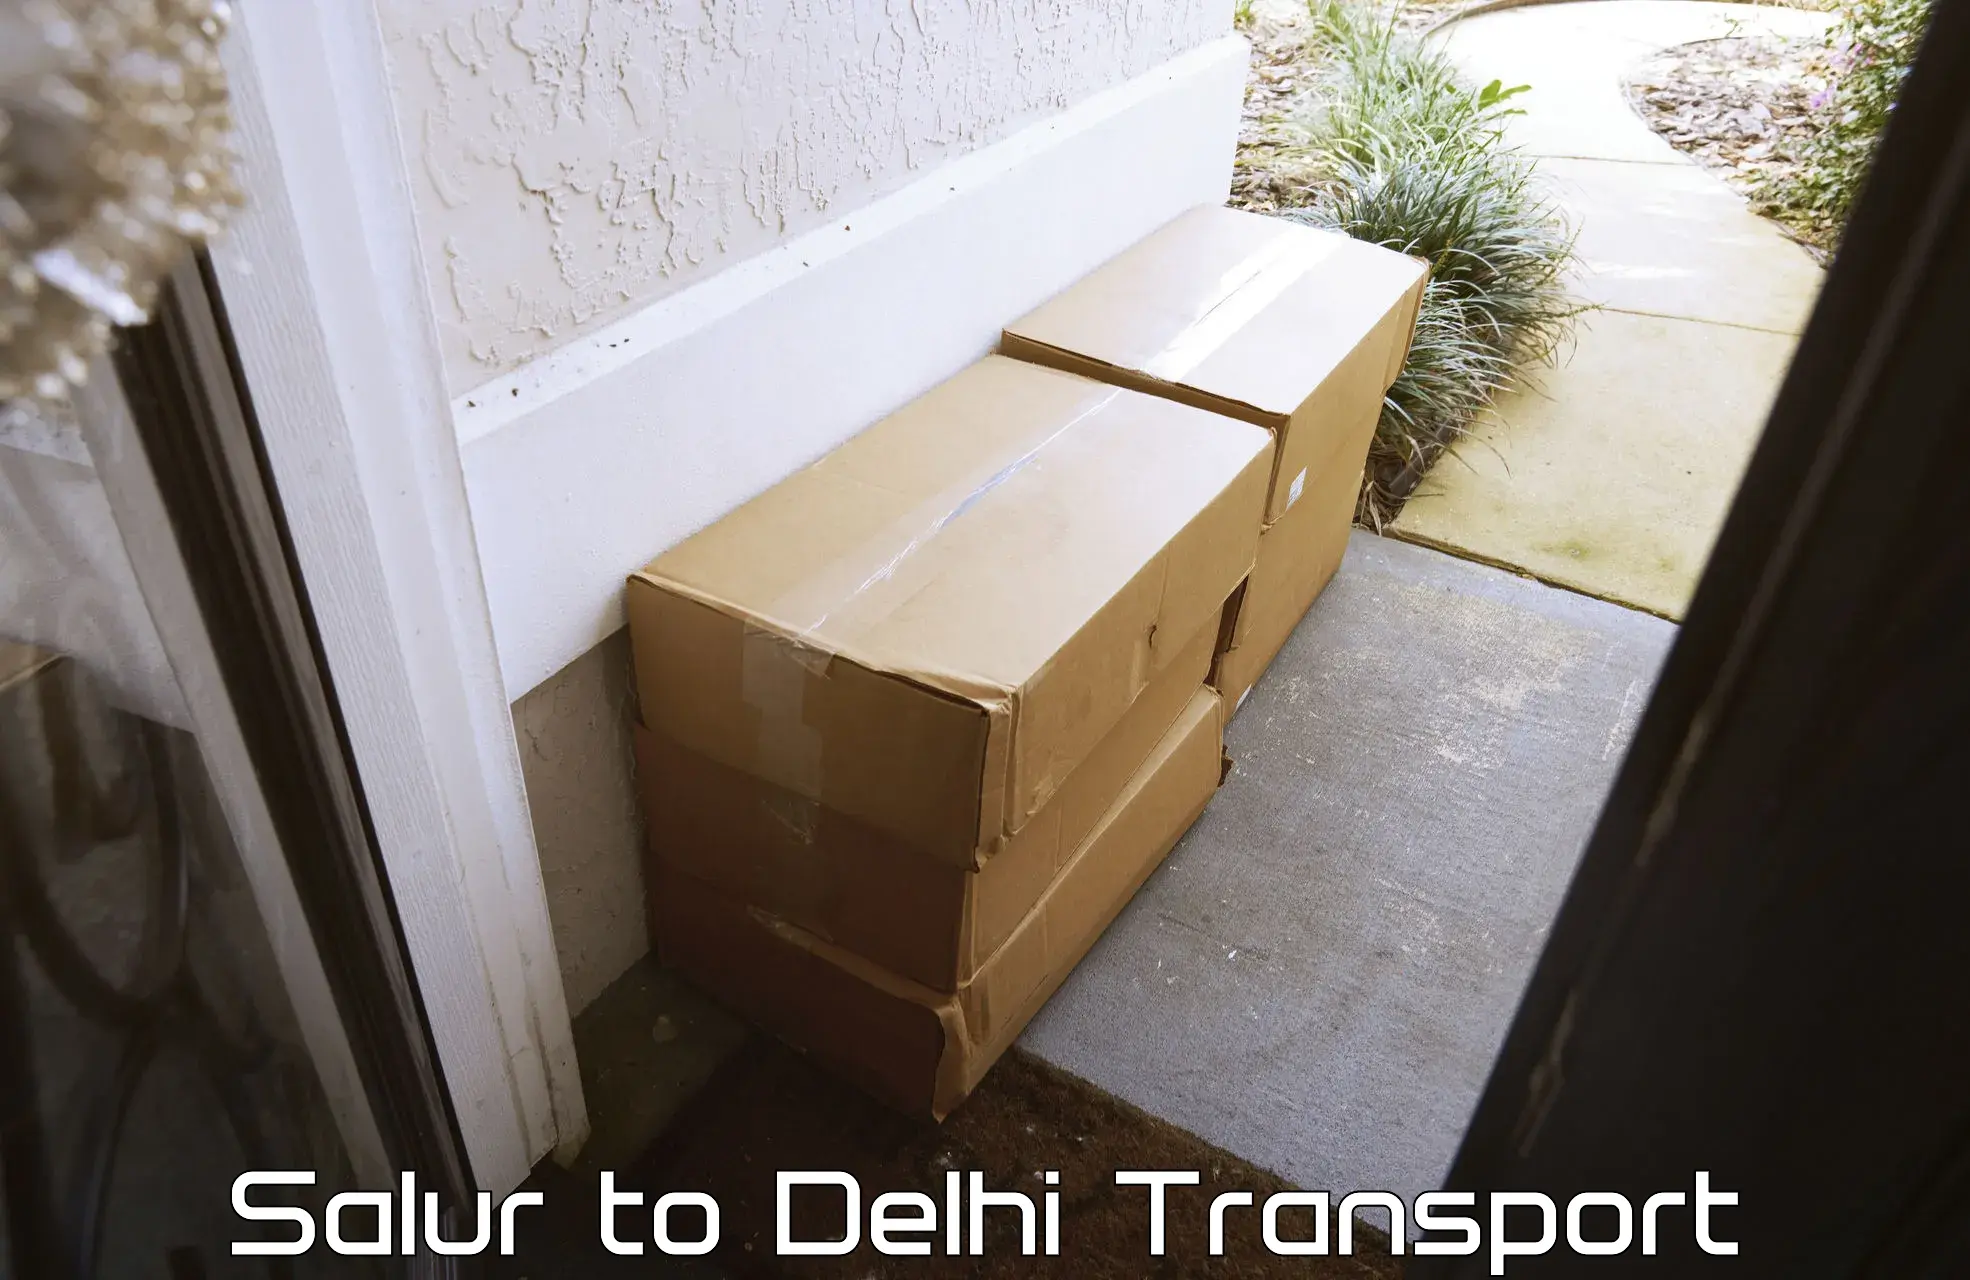 Sending bike to another city Salur to Delhi